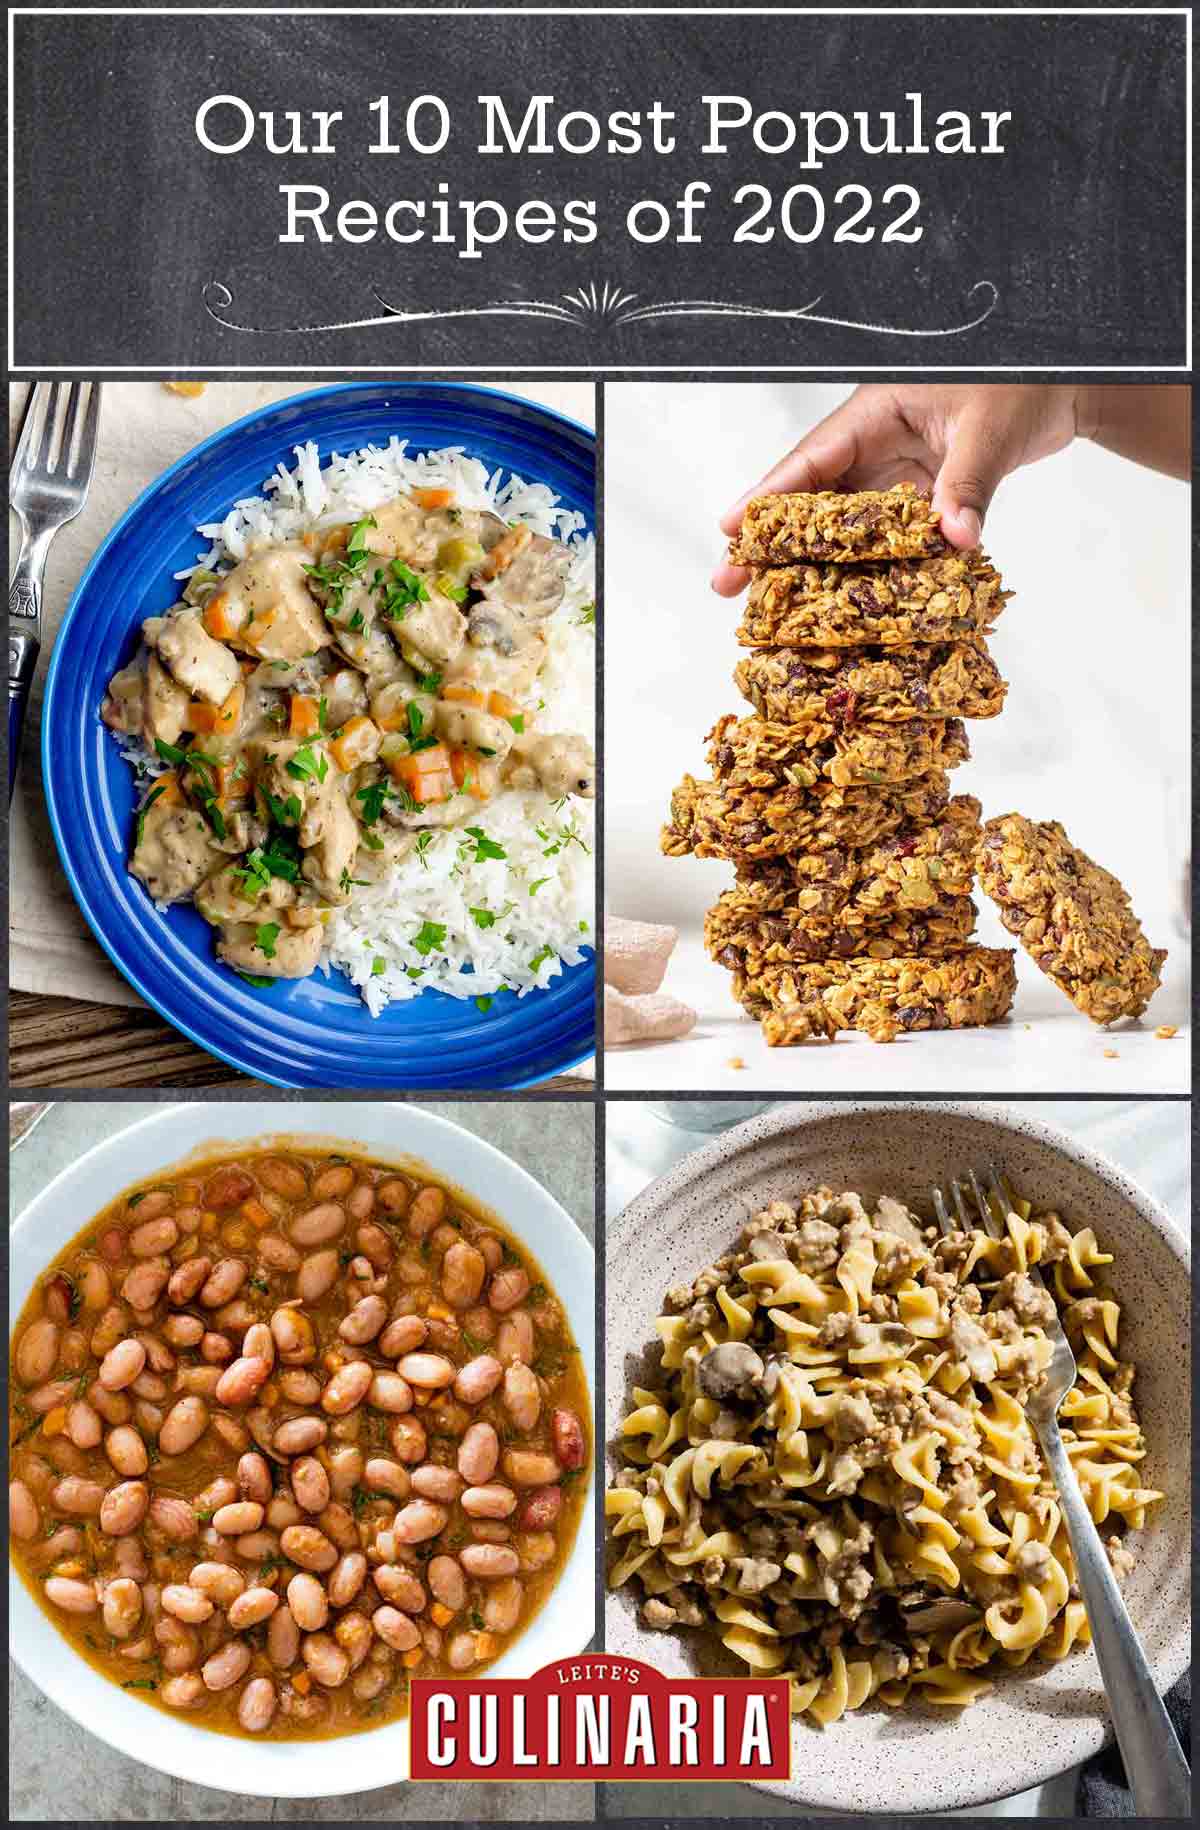 A plate of chicken stew and rice, a stack of breakfast cookies, a bowl of beans, and a bowl of creamy noodles and ground pork.